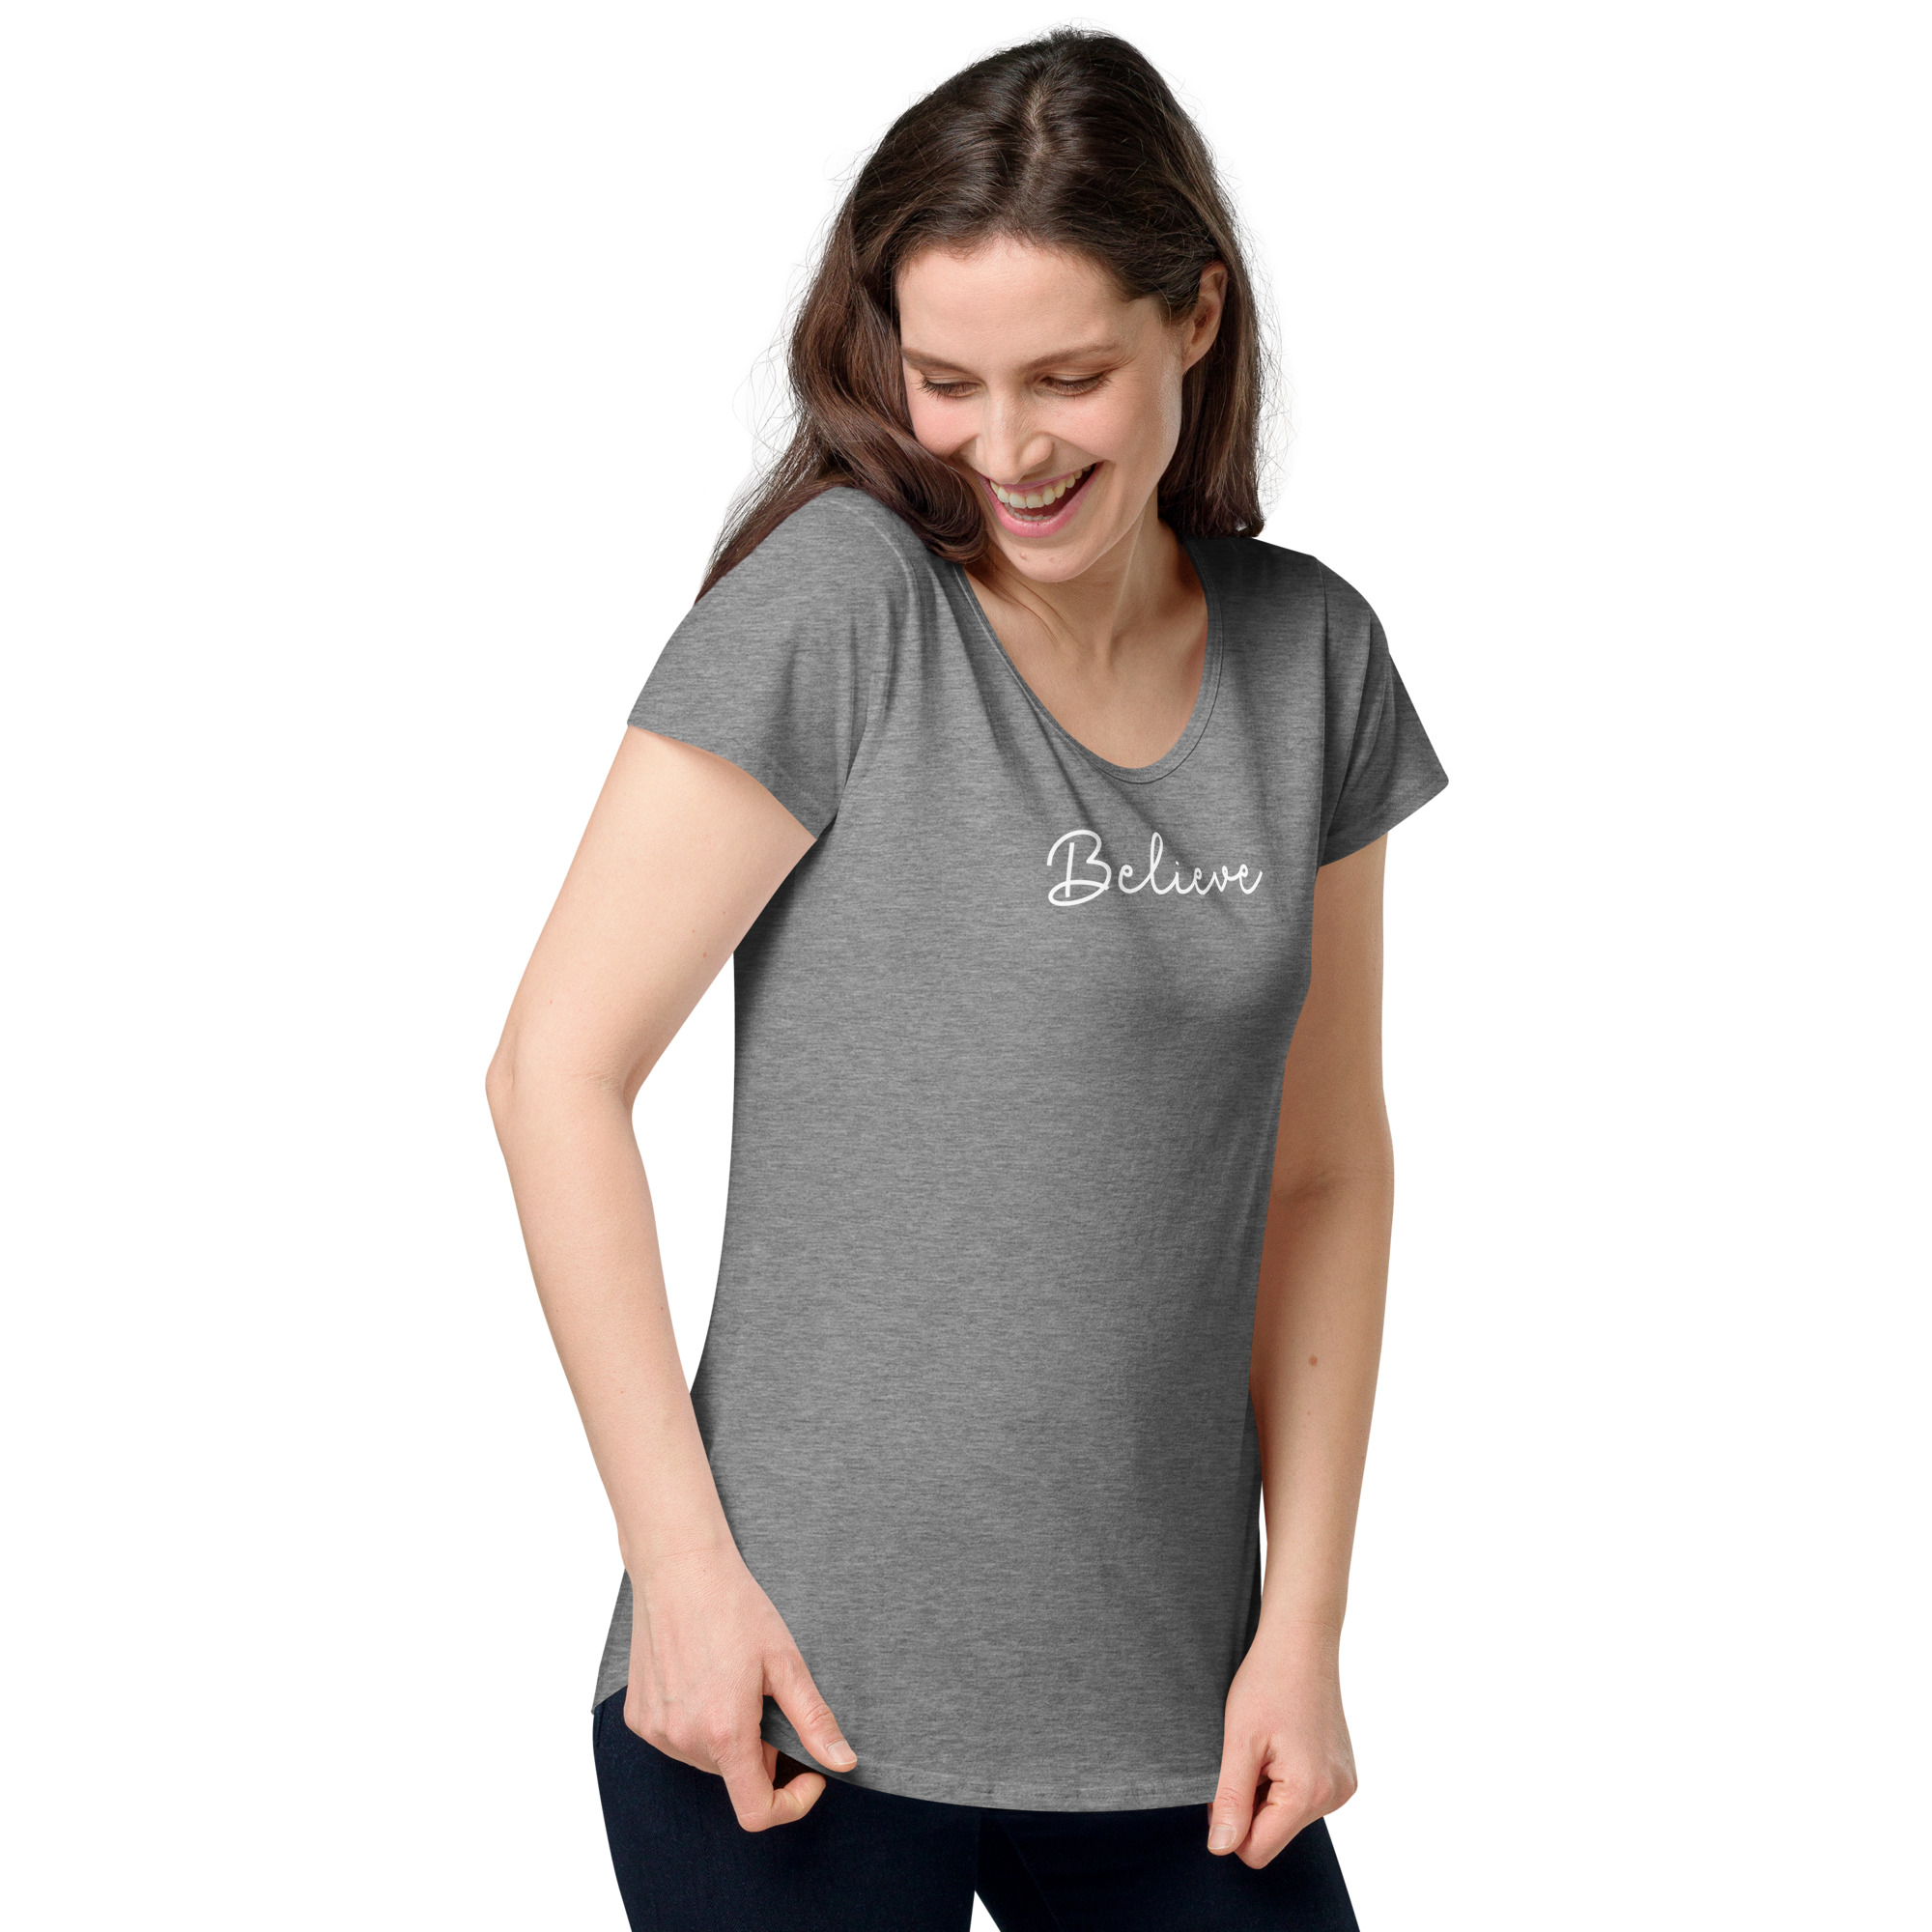 womens-round-neck-tee-grey-marle-right-front-634dd8771be0b.jpg